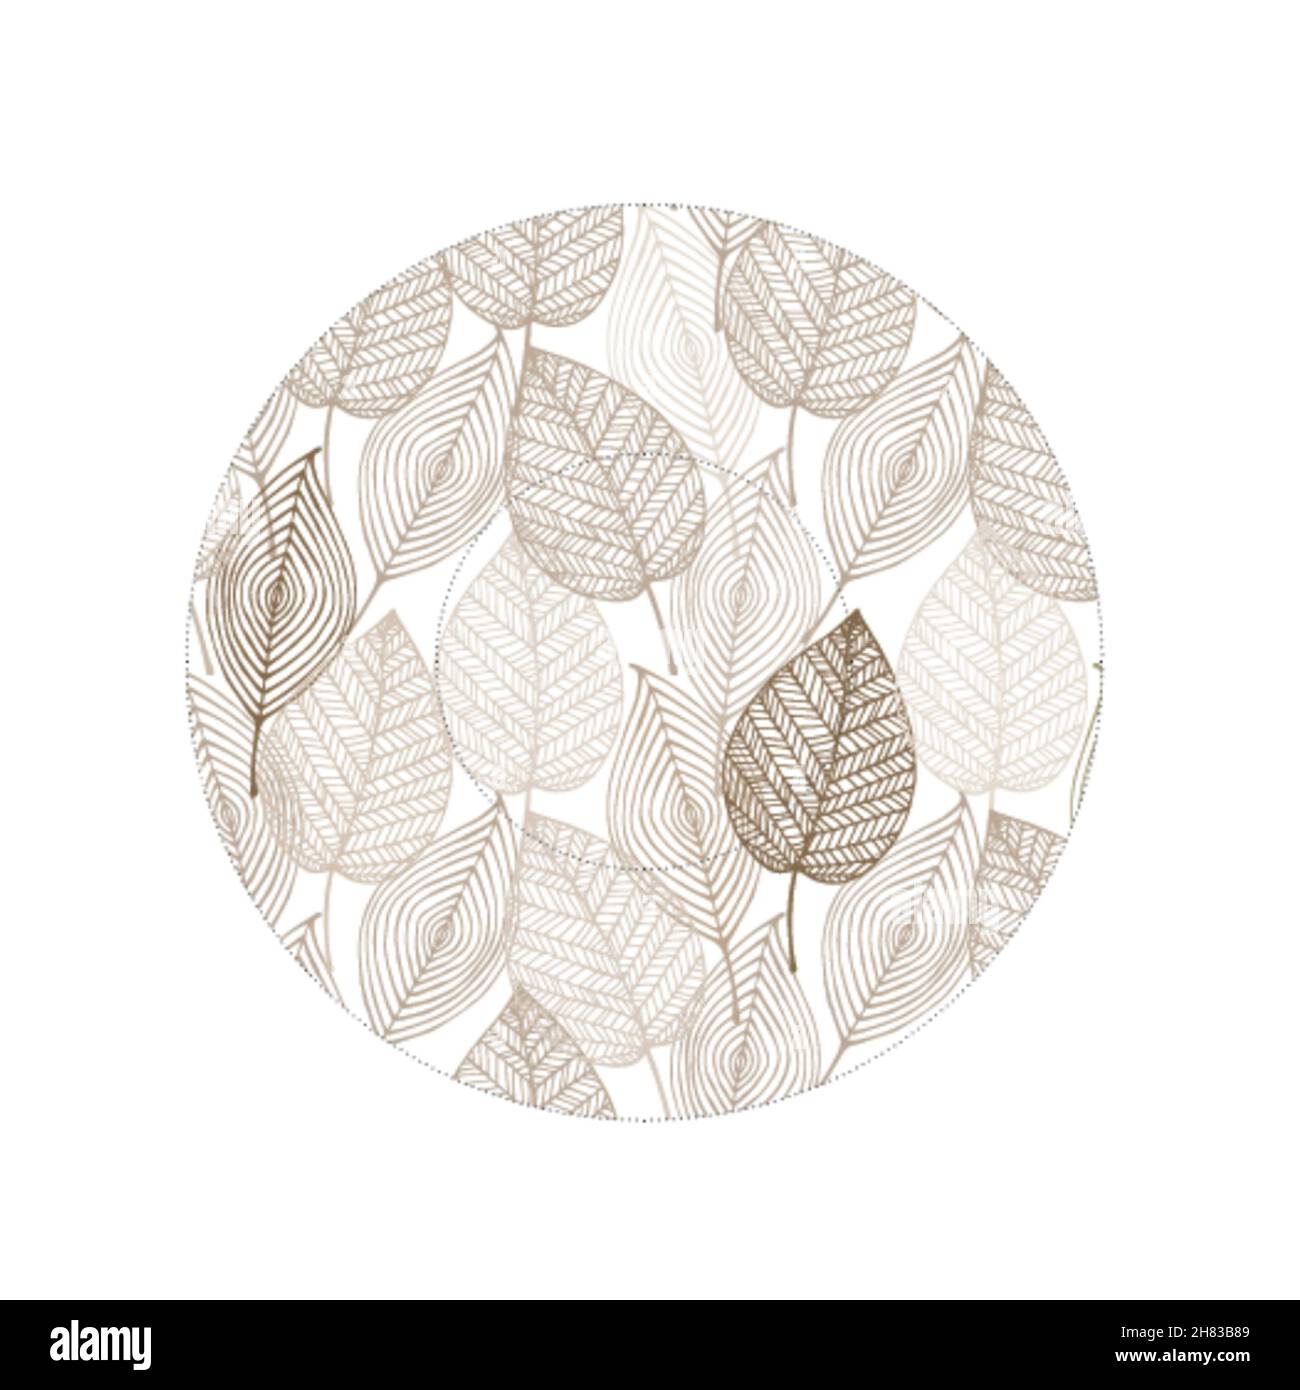 Plate with ornament for decoration purposes isolated over white background illustration. Textured decor round icon, circle with leaves pattern Stock Photo